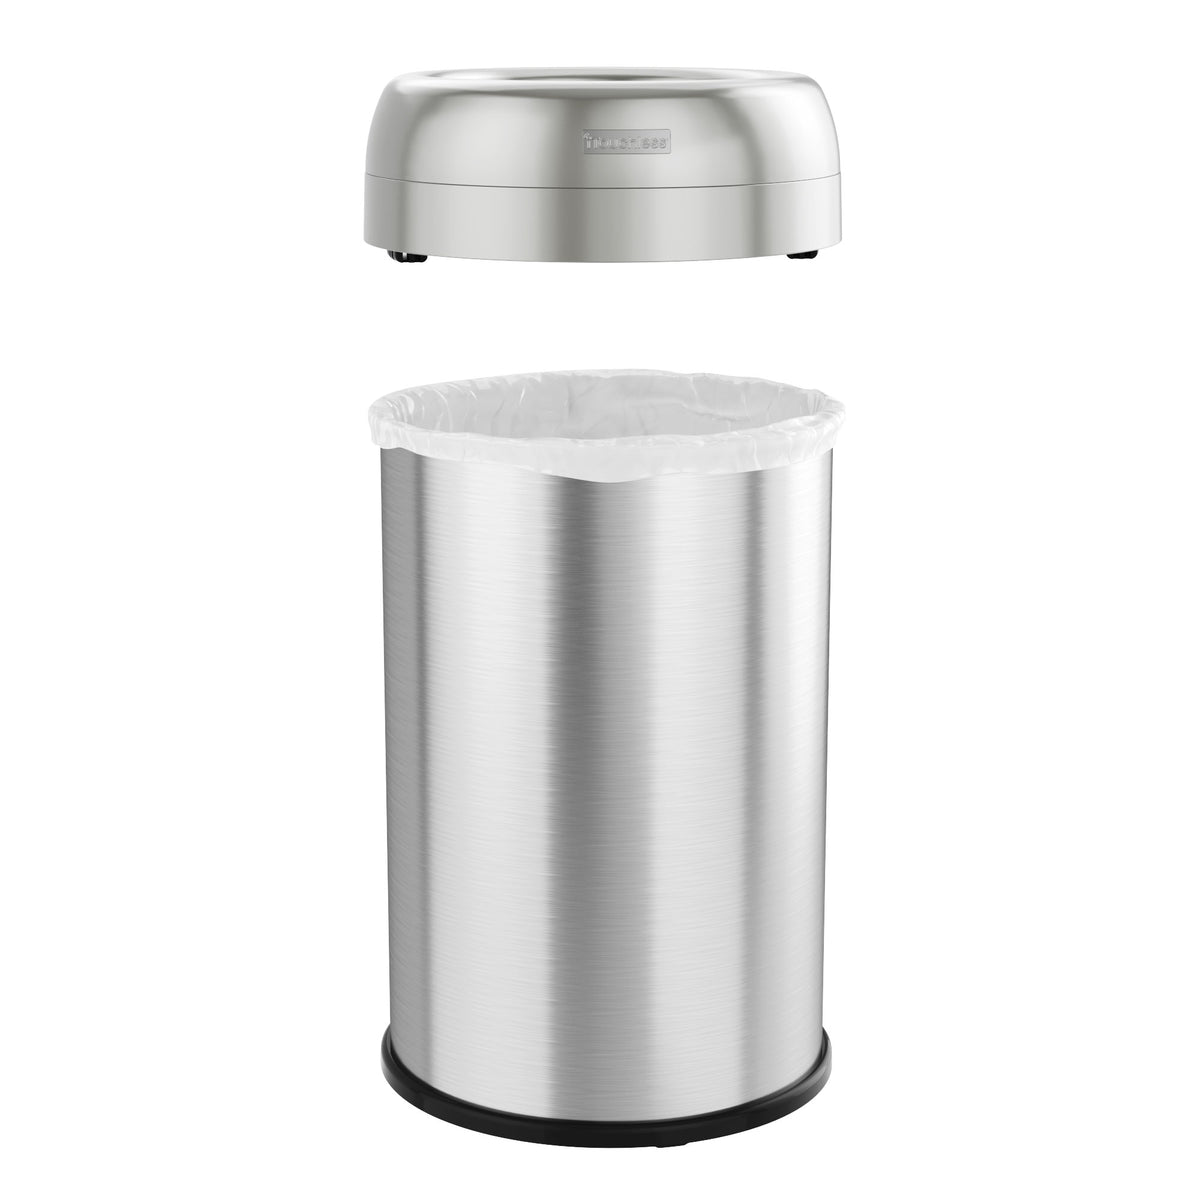 13 Gallon Round Open Top Trash Can with Wheels snug fit lid